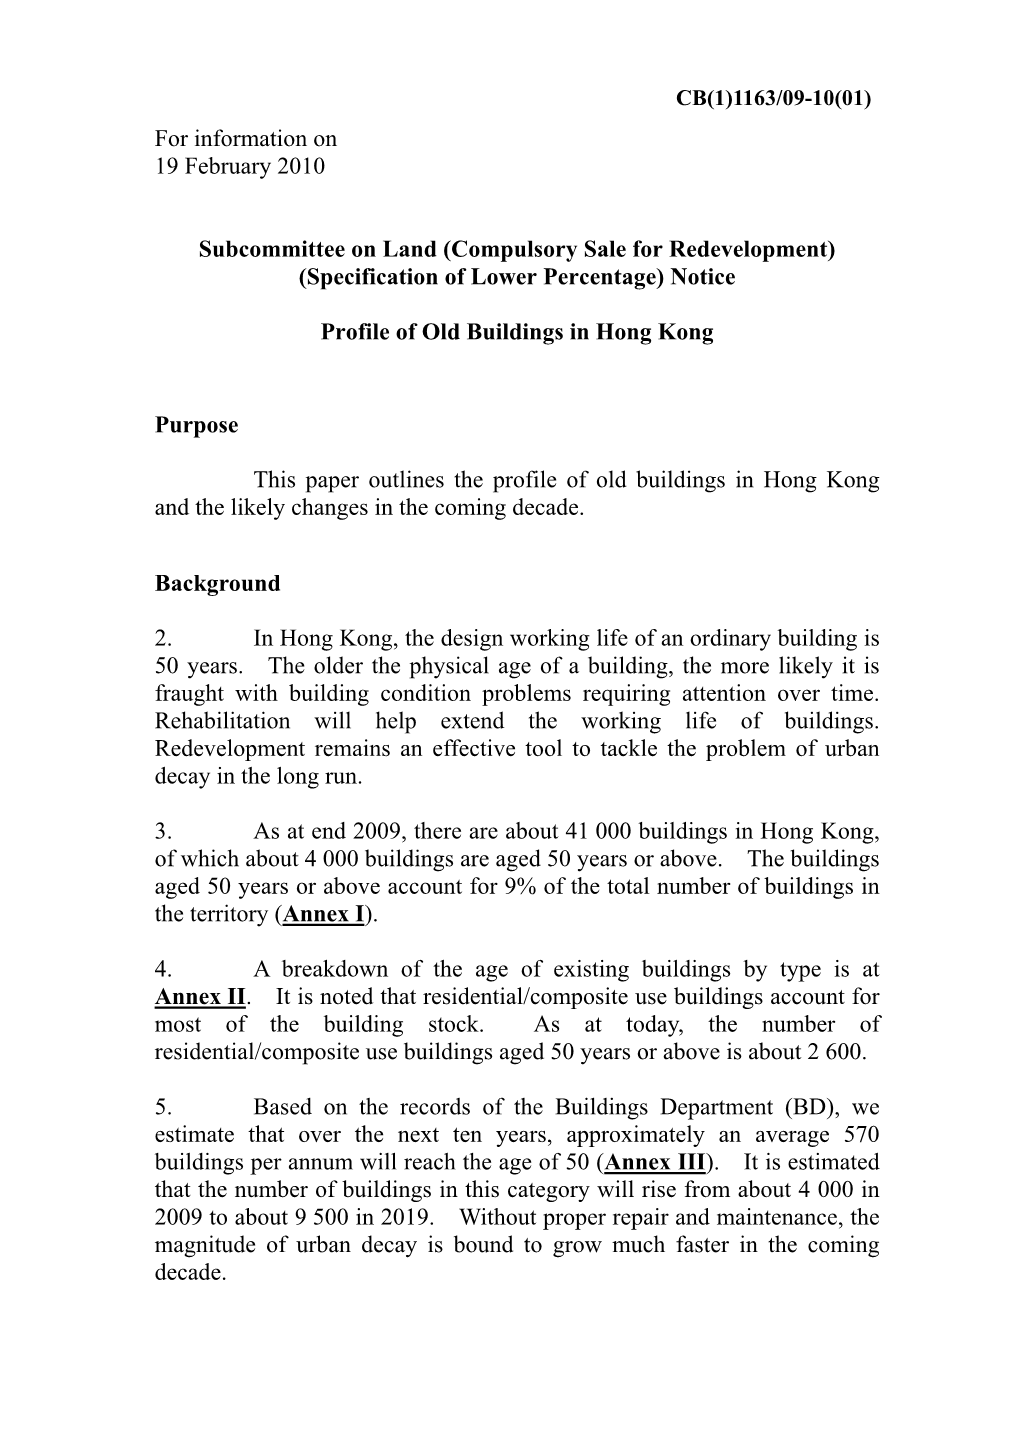 Administration's Paper on Profile of Old Buildings in Hong Kong